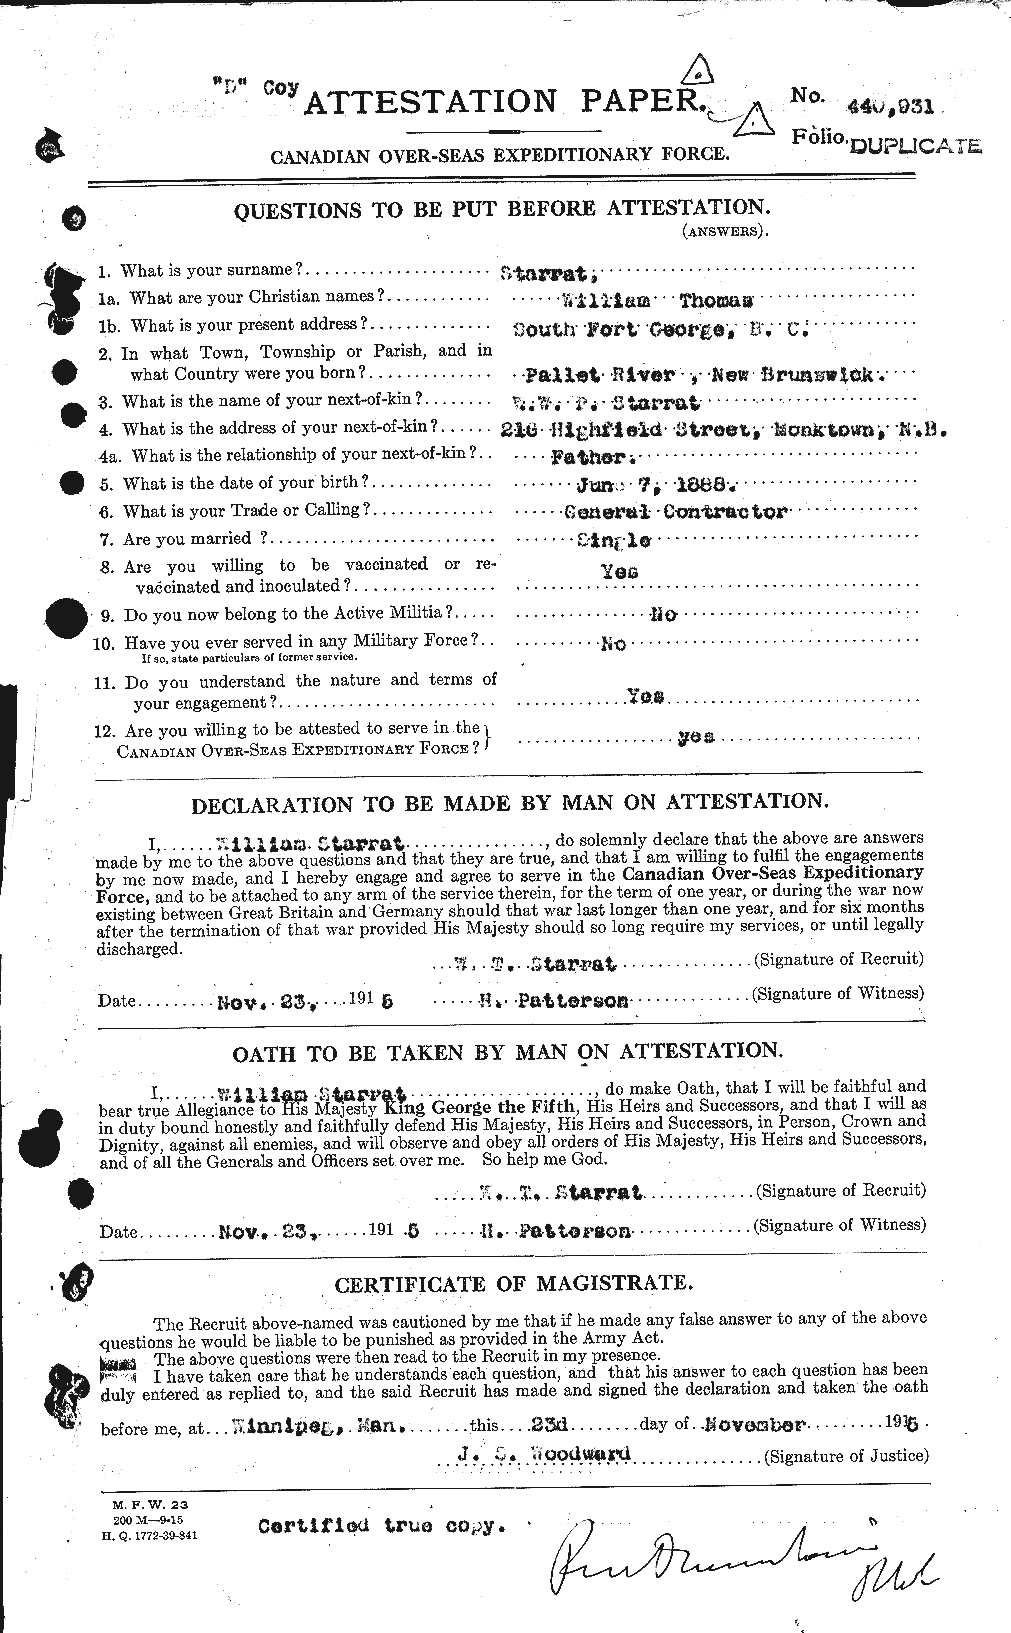 Personnel Records of the First World War - CEF 116419a